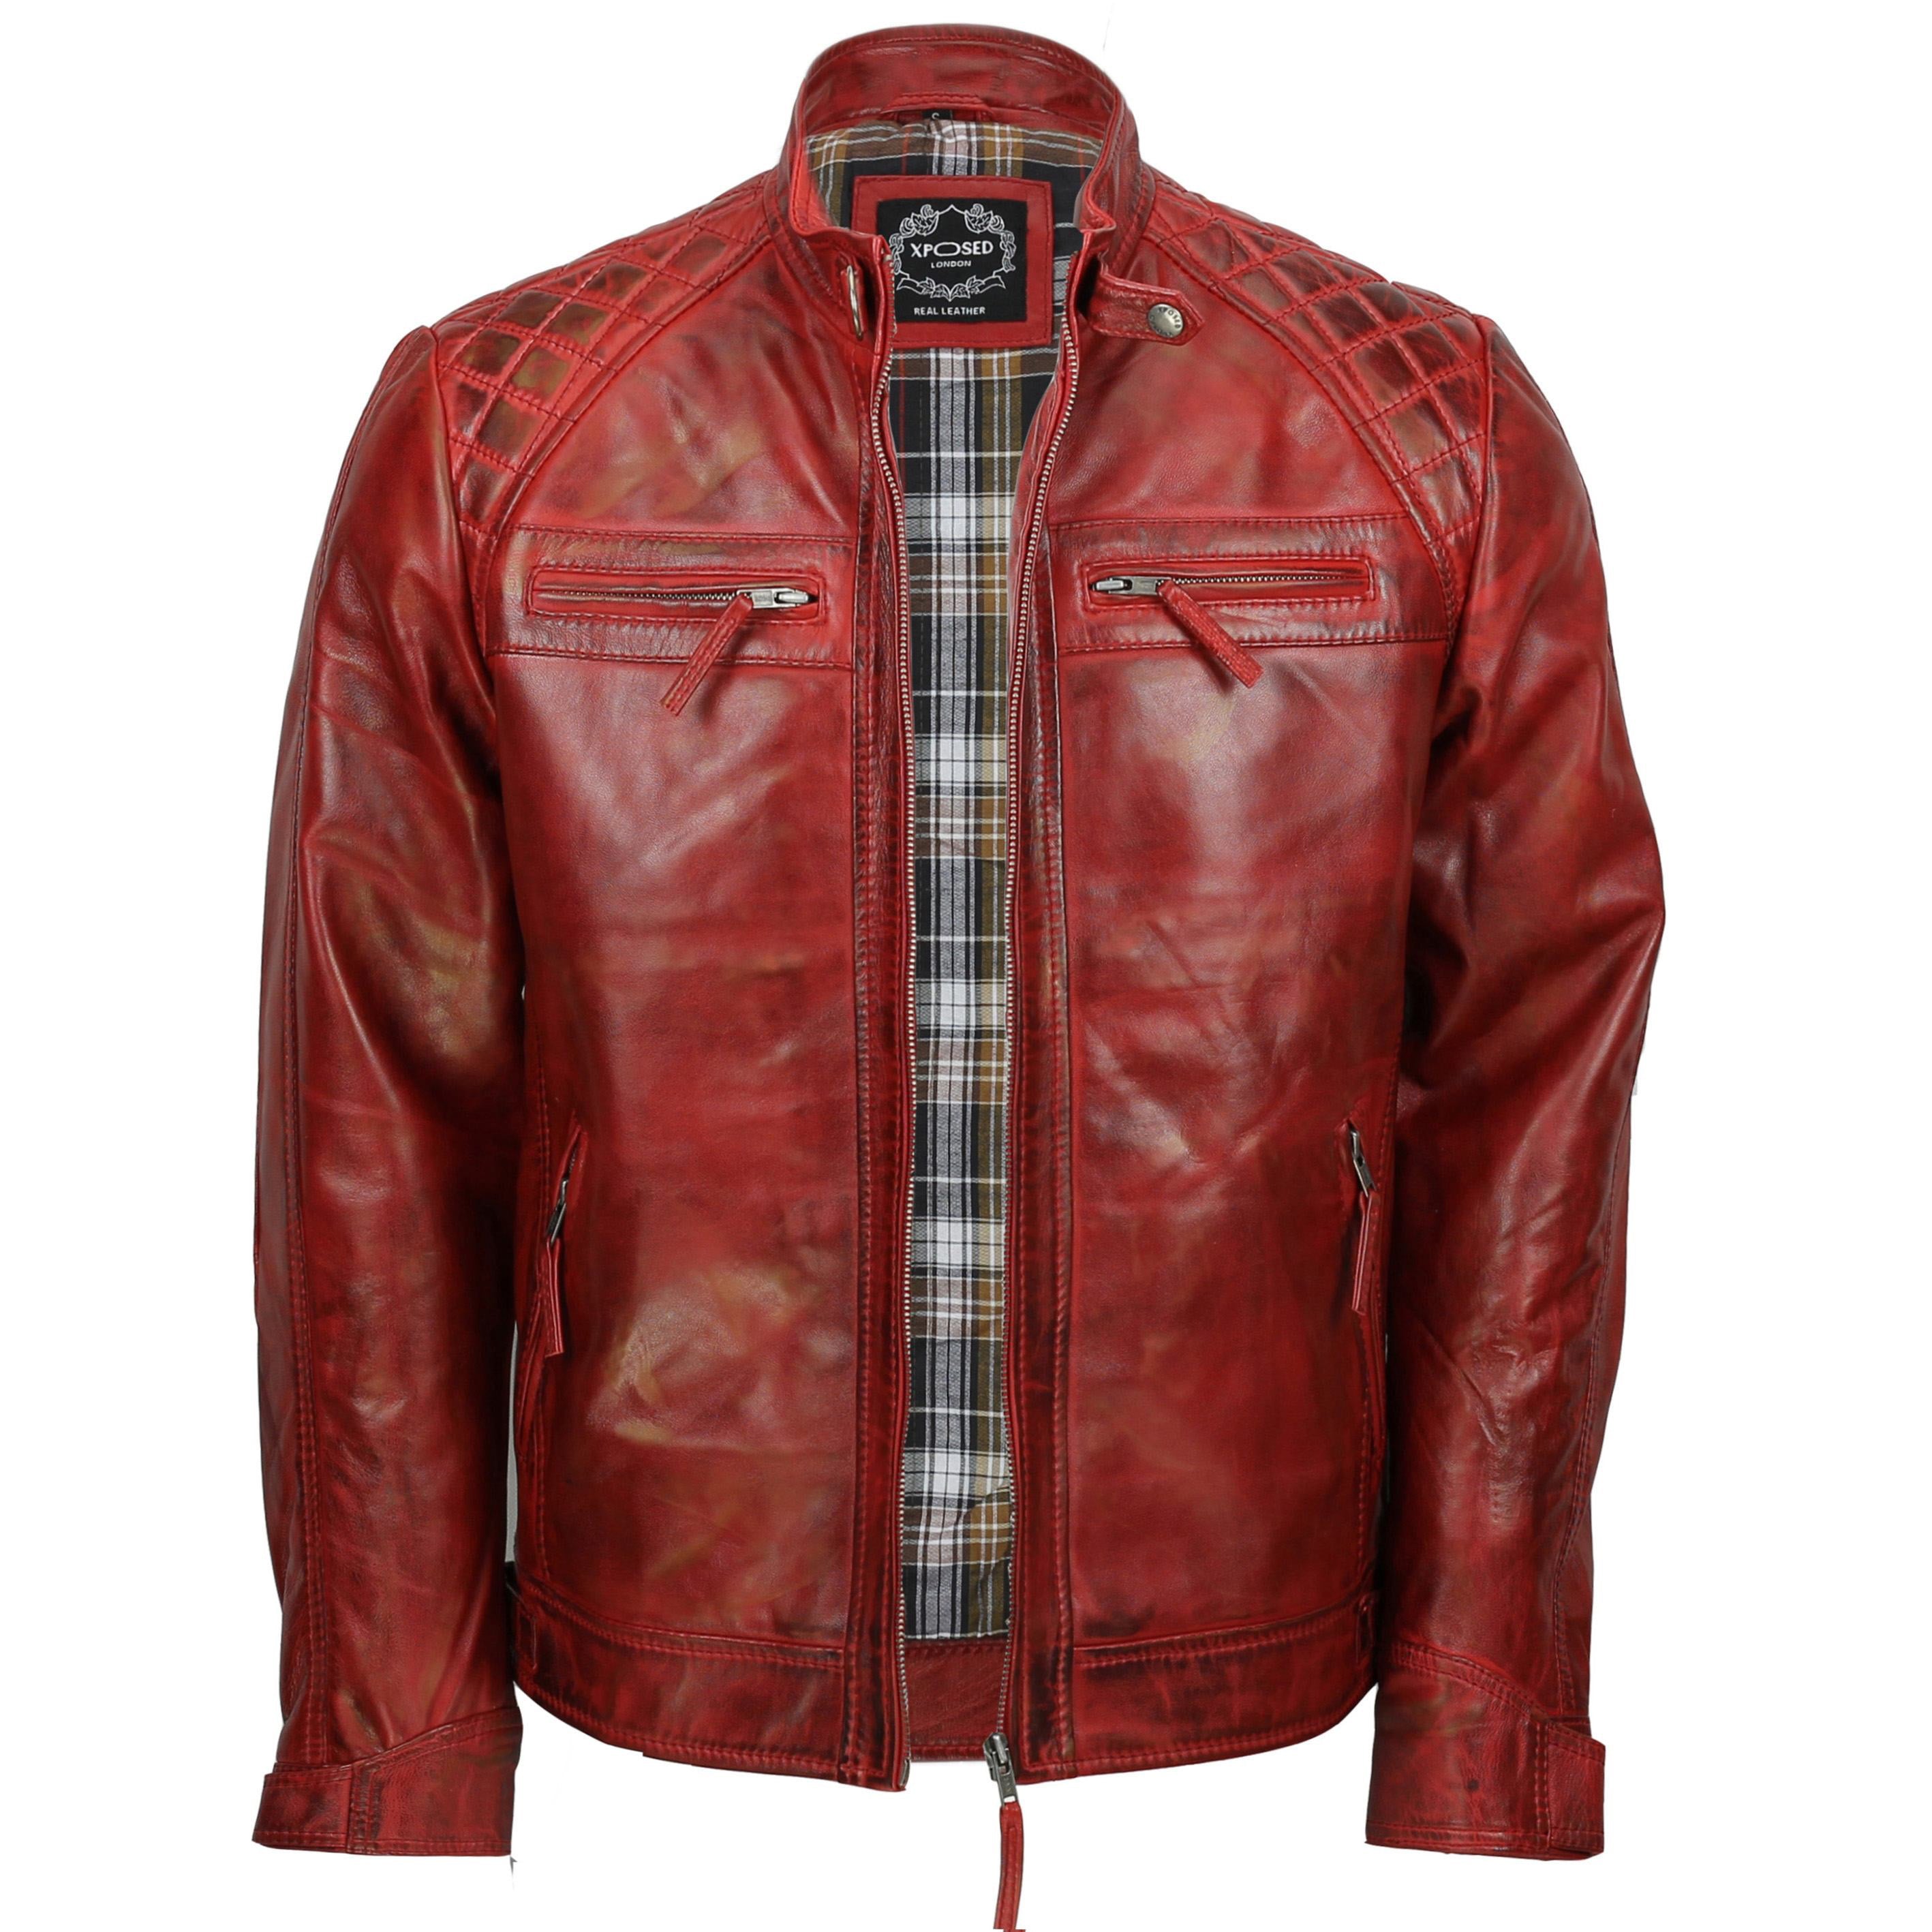 QUILTED RED BIKER LEATHER JACKET